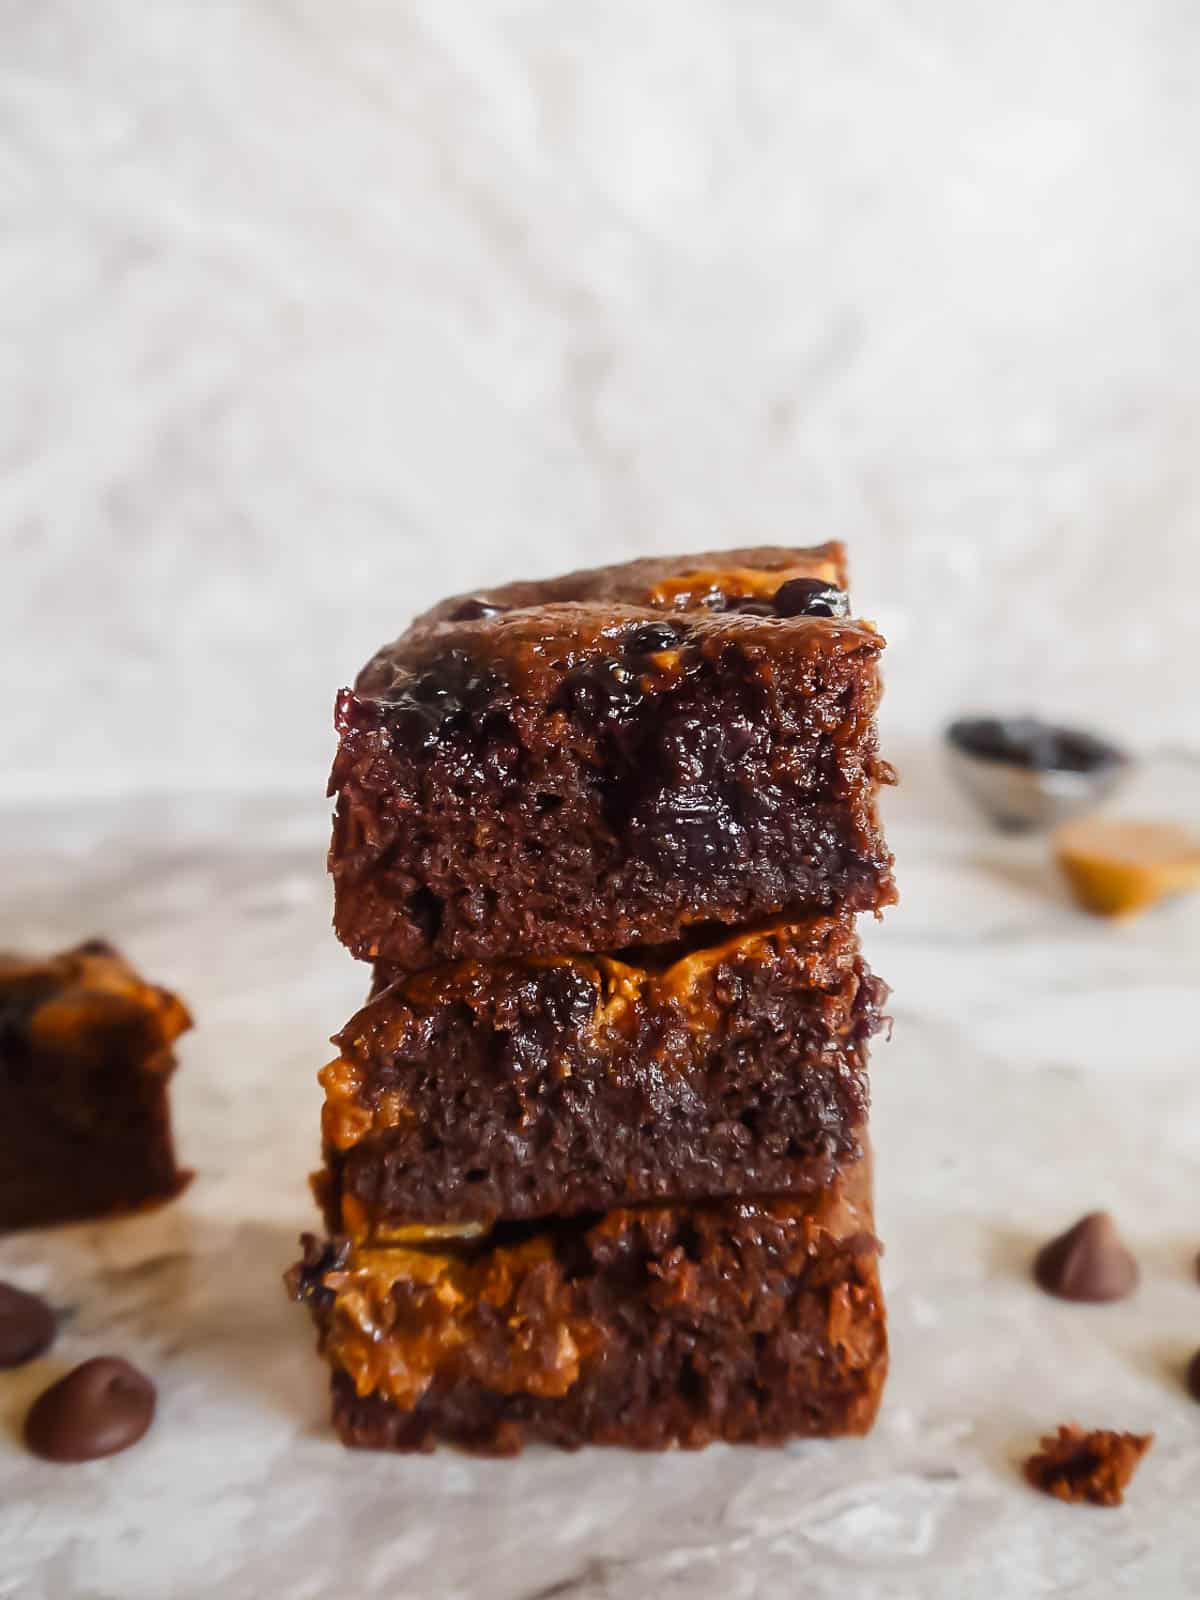 Almond flour brownies recipe with almond butter and jelly. Brownies stacked on top of each other. 